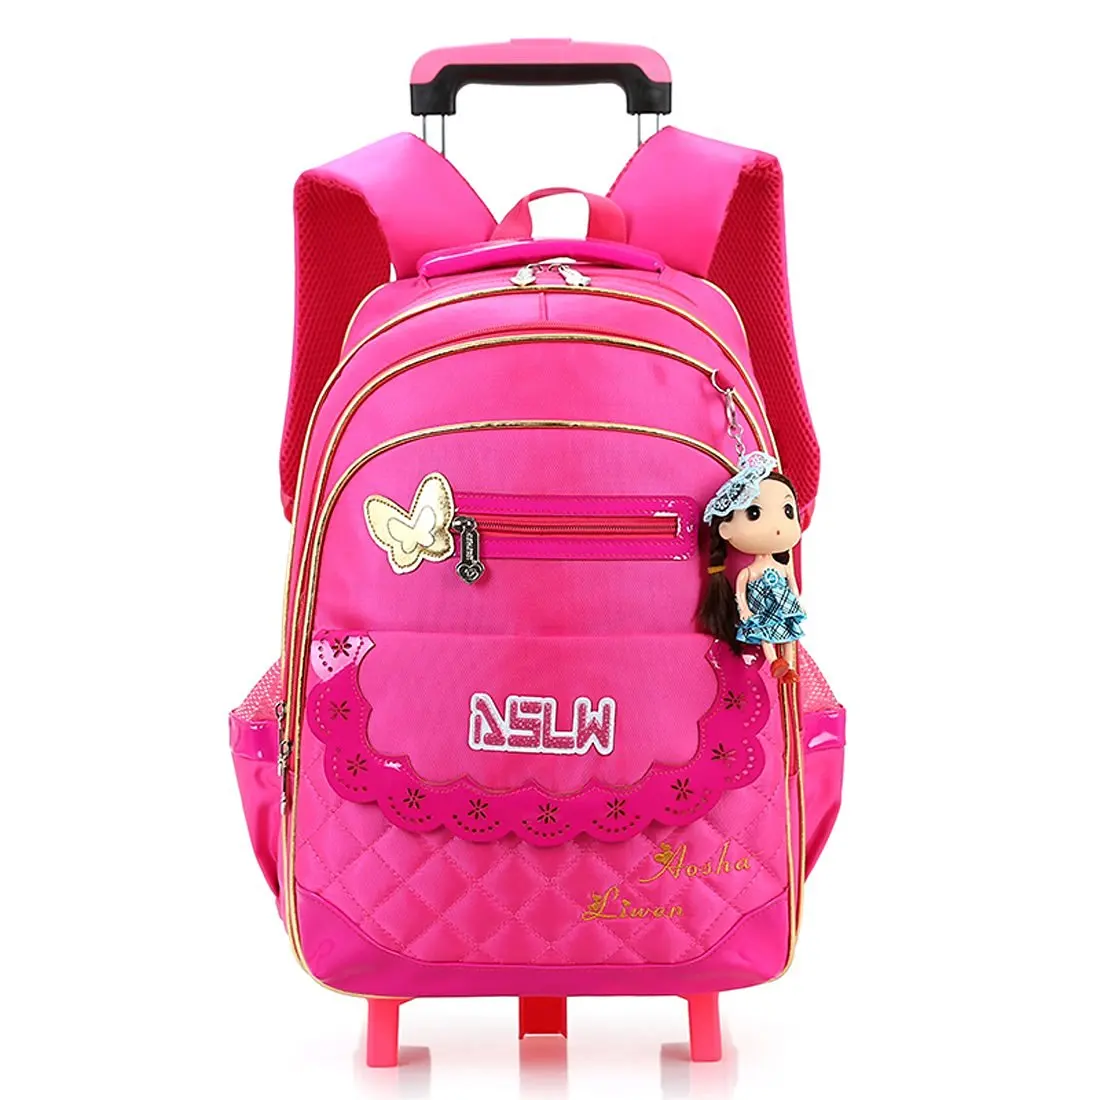 Cheap Red Schoolbag, find Red Schoolbag deals on line at Alibaba.com